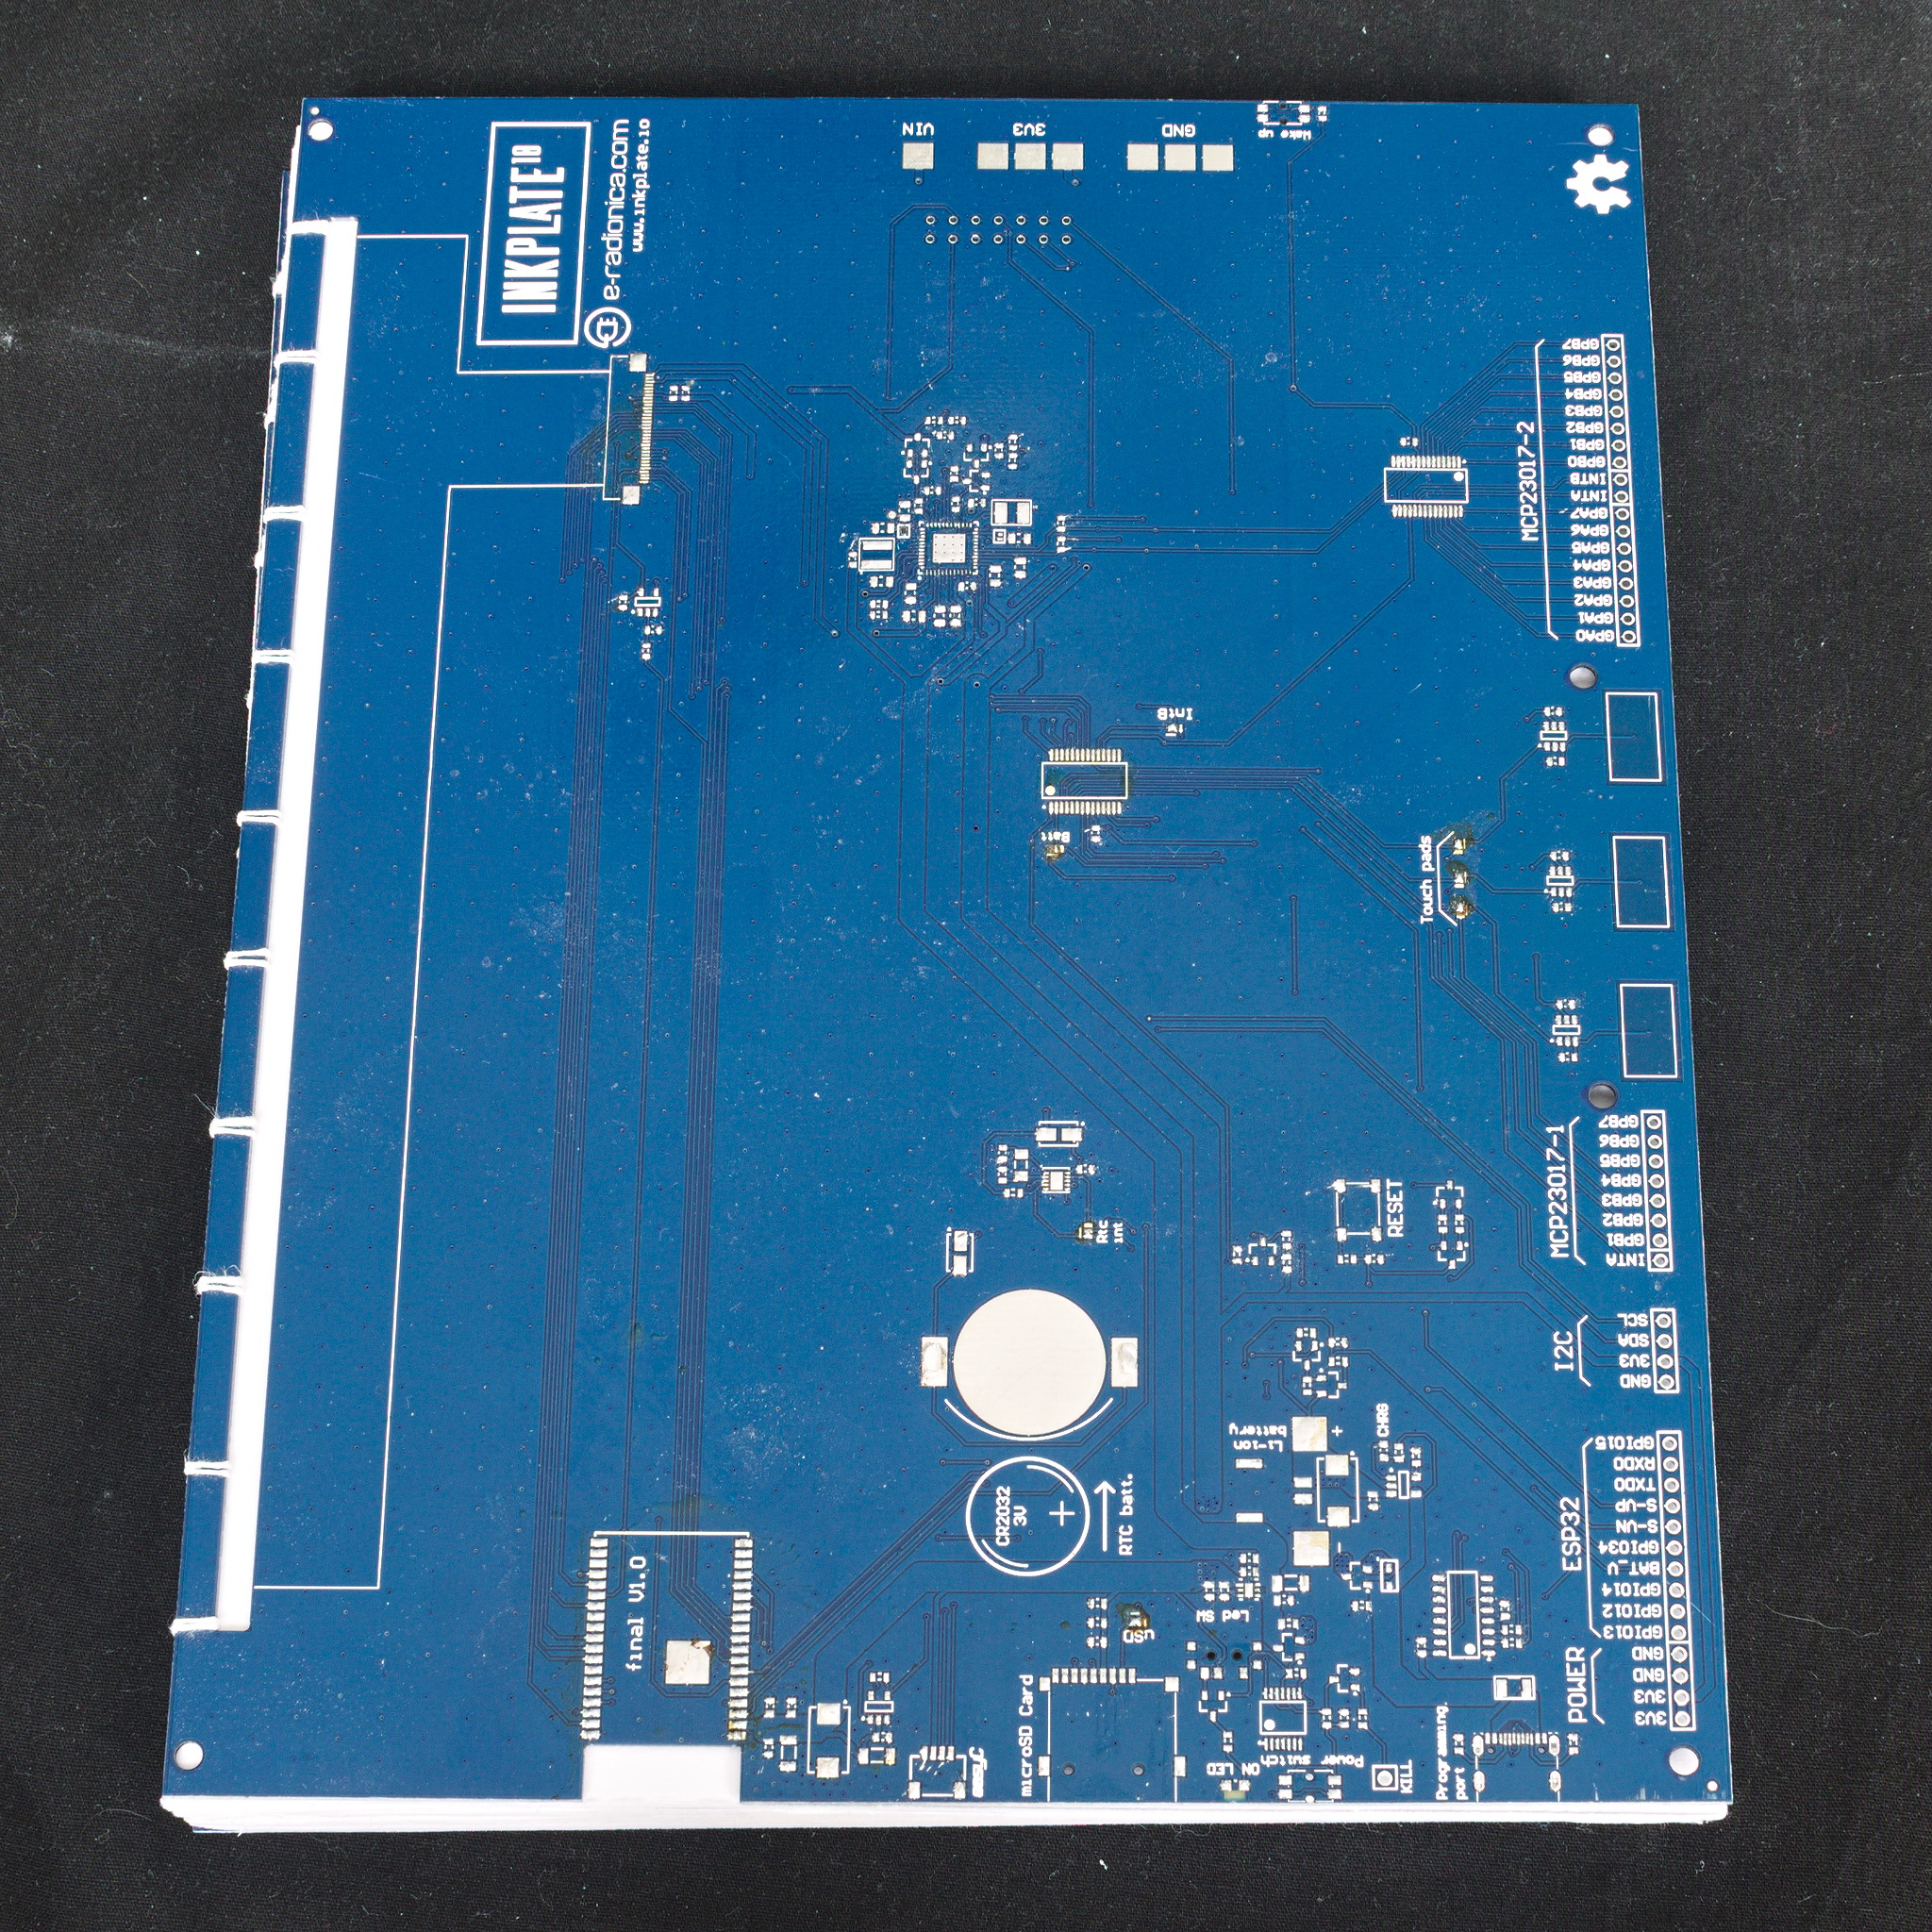 A coptic bound book with a blue PCB as the cover.